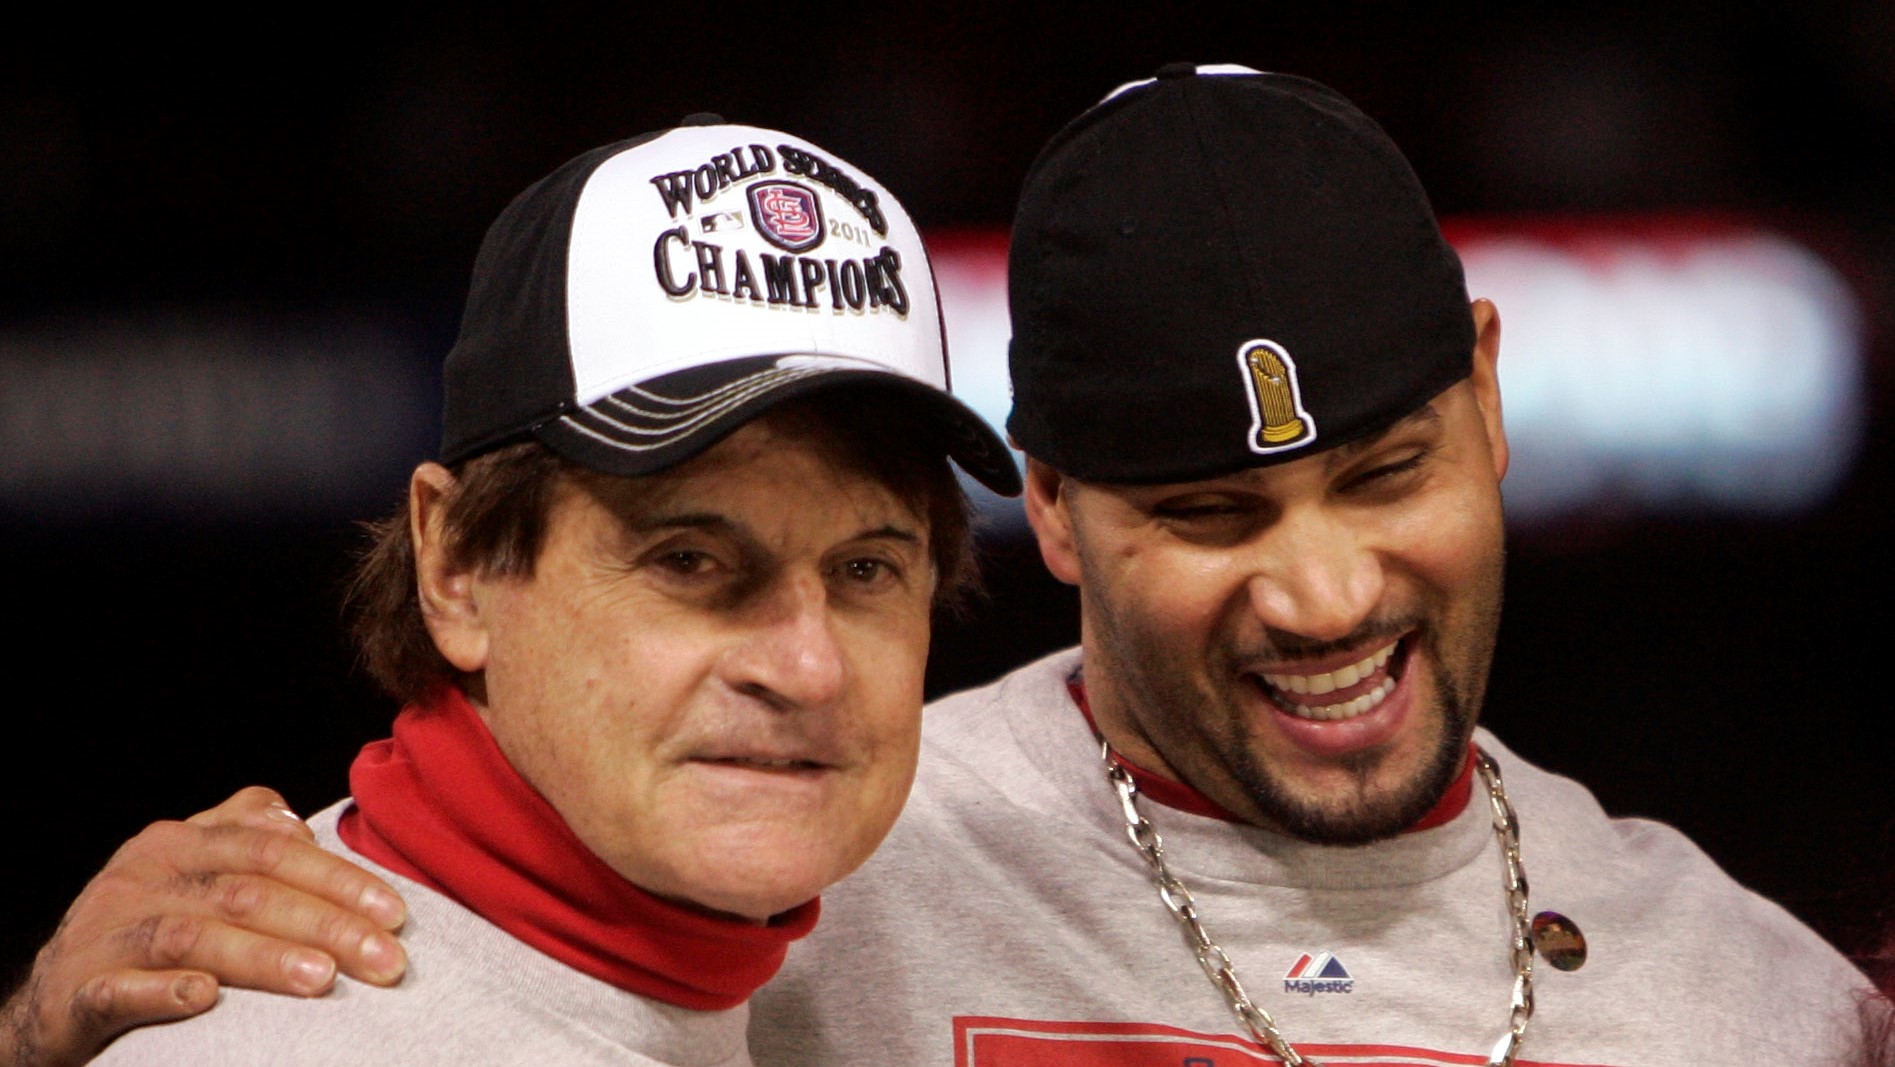 Tony La Russa, Oldest Active Manager In Majors, Retires At 78